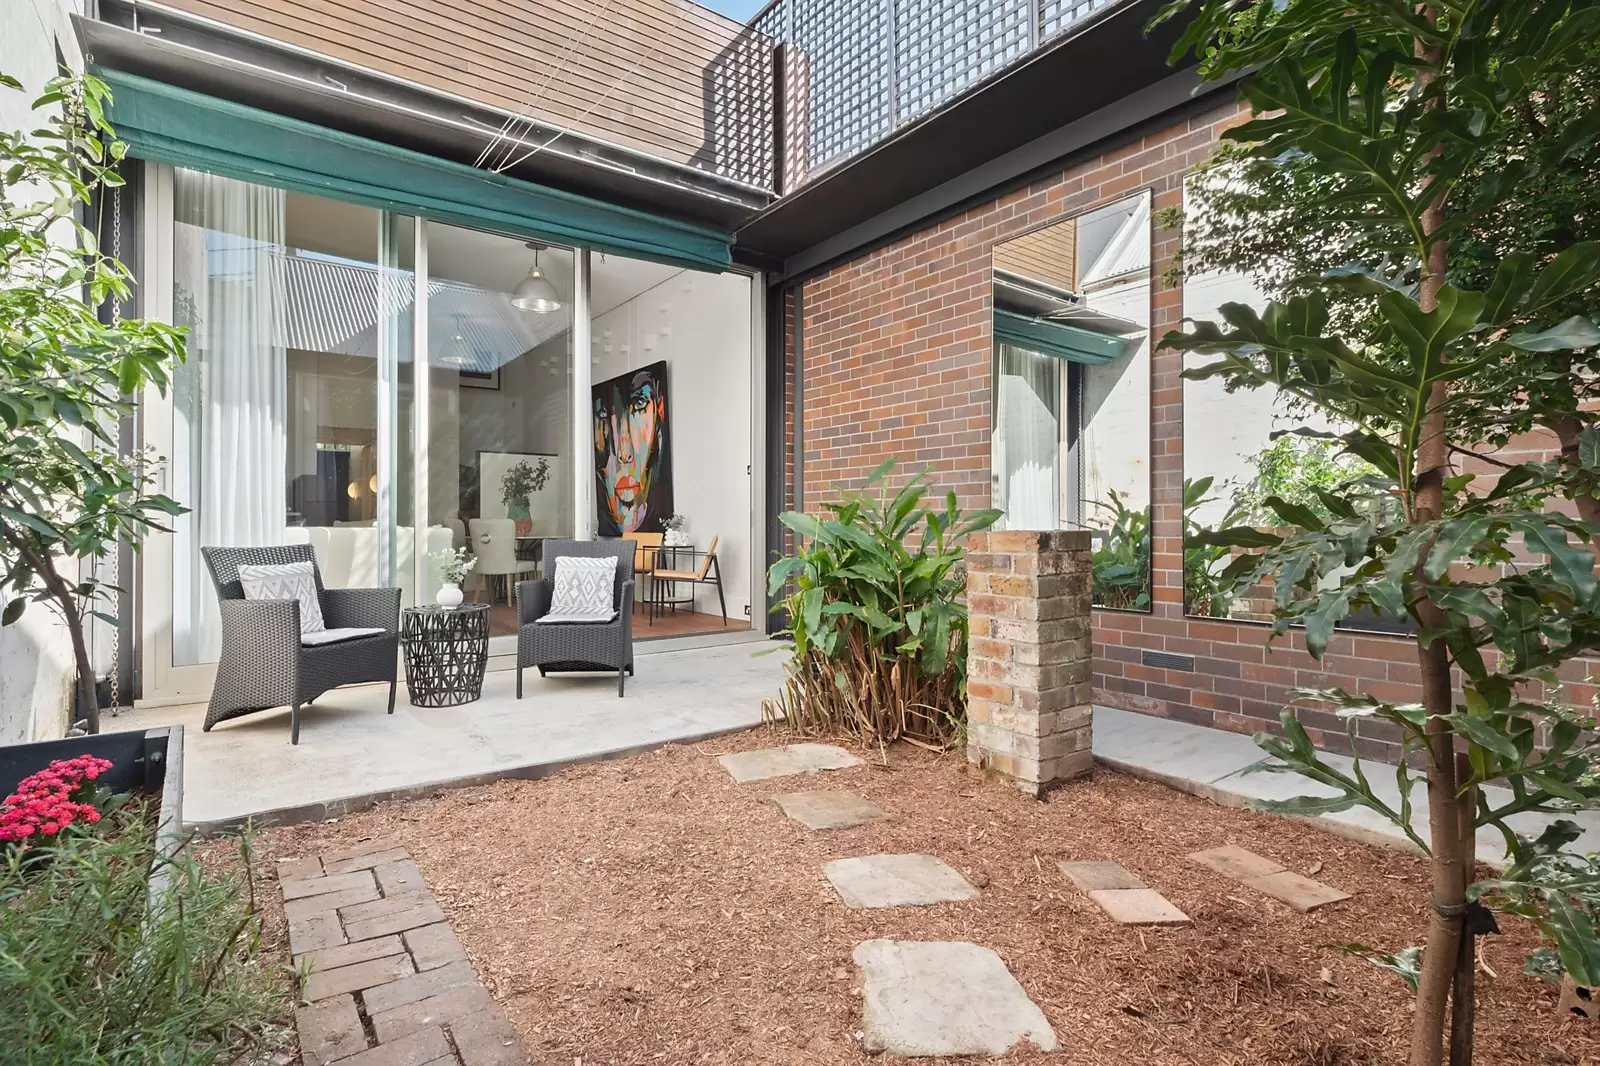 Photo #8: 30 Queen Street, Glebe - Sold by Sydney Sotheby's International Realty